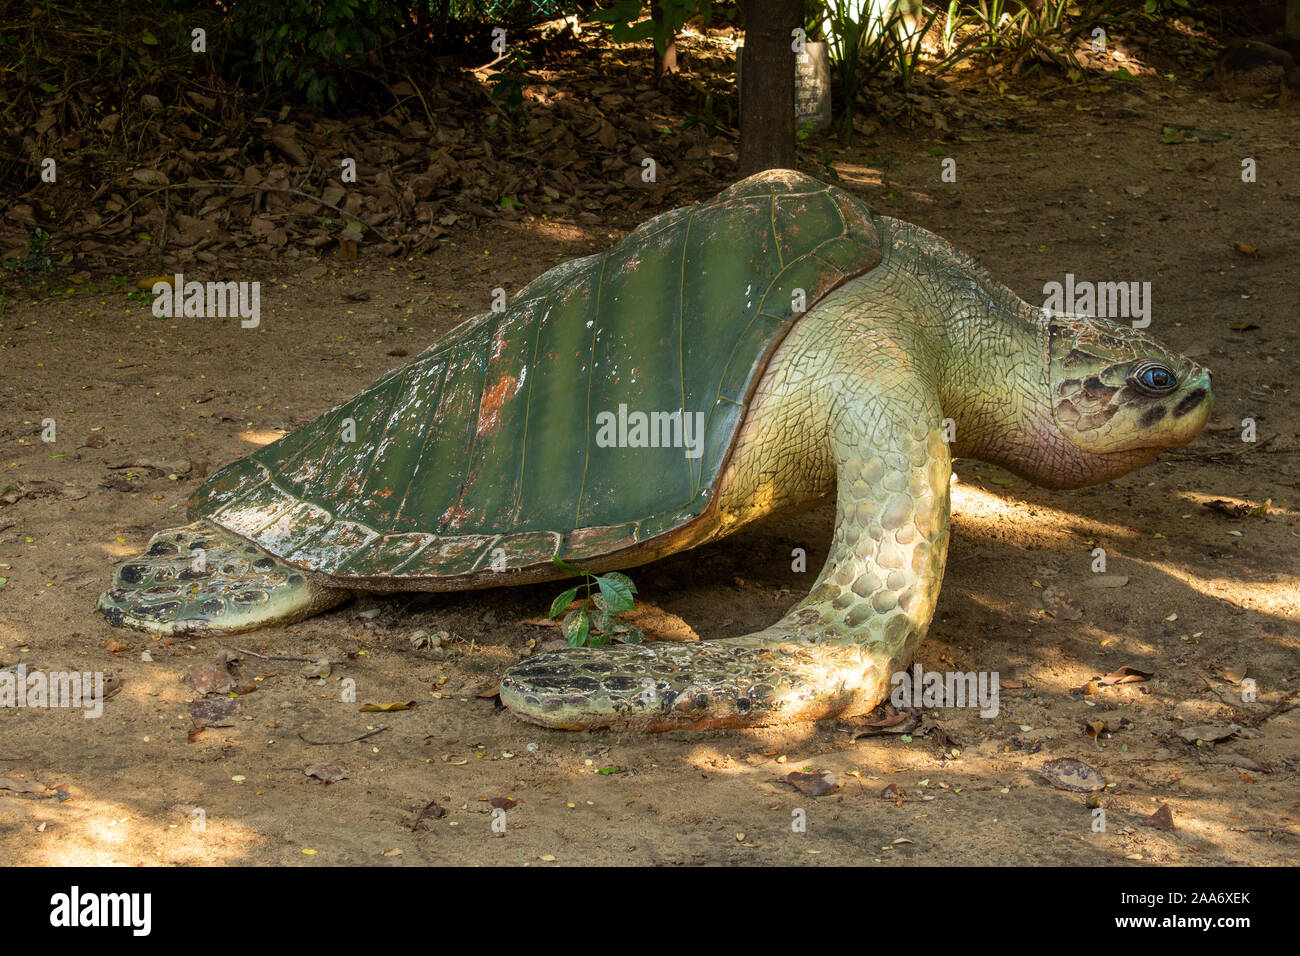 Chennai, Tamil Nadu / India - November 02 2019 : View of the turtle statue with art work in Tholkappia Poonga (also known as Adyar Eco Park). Stock Photo